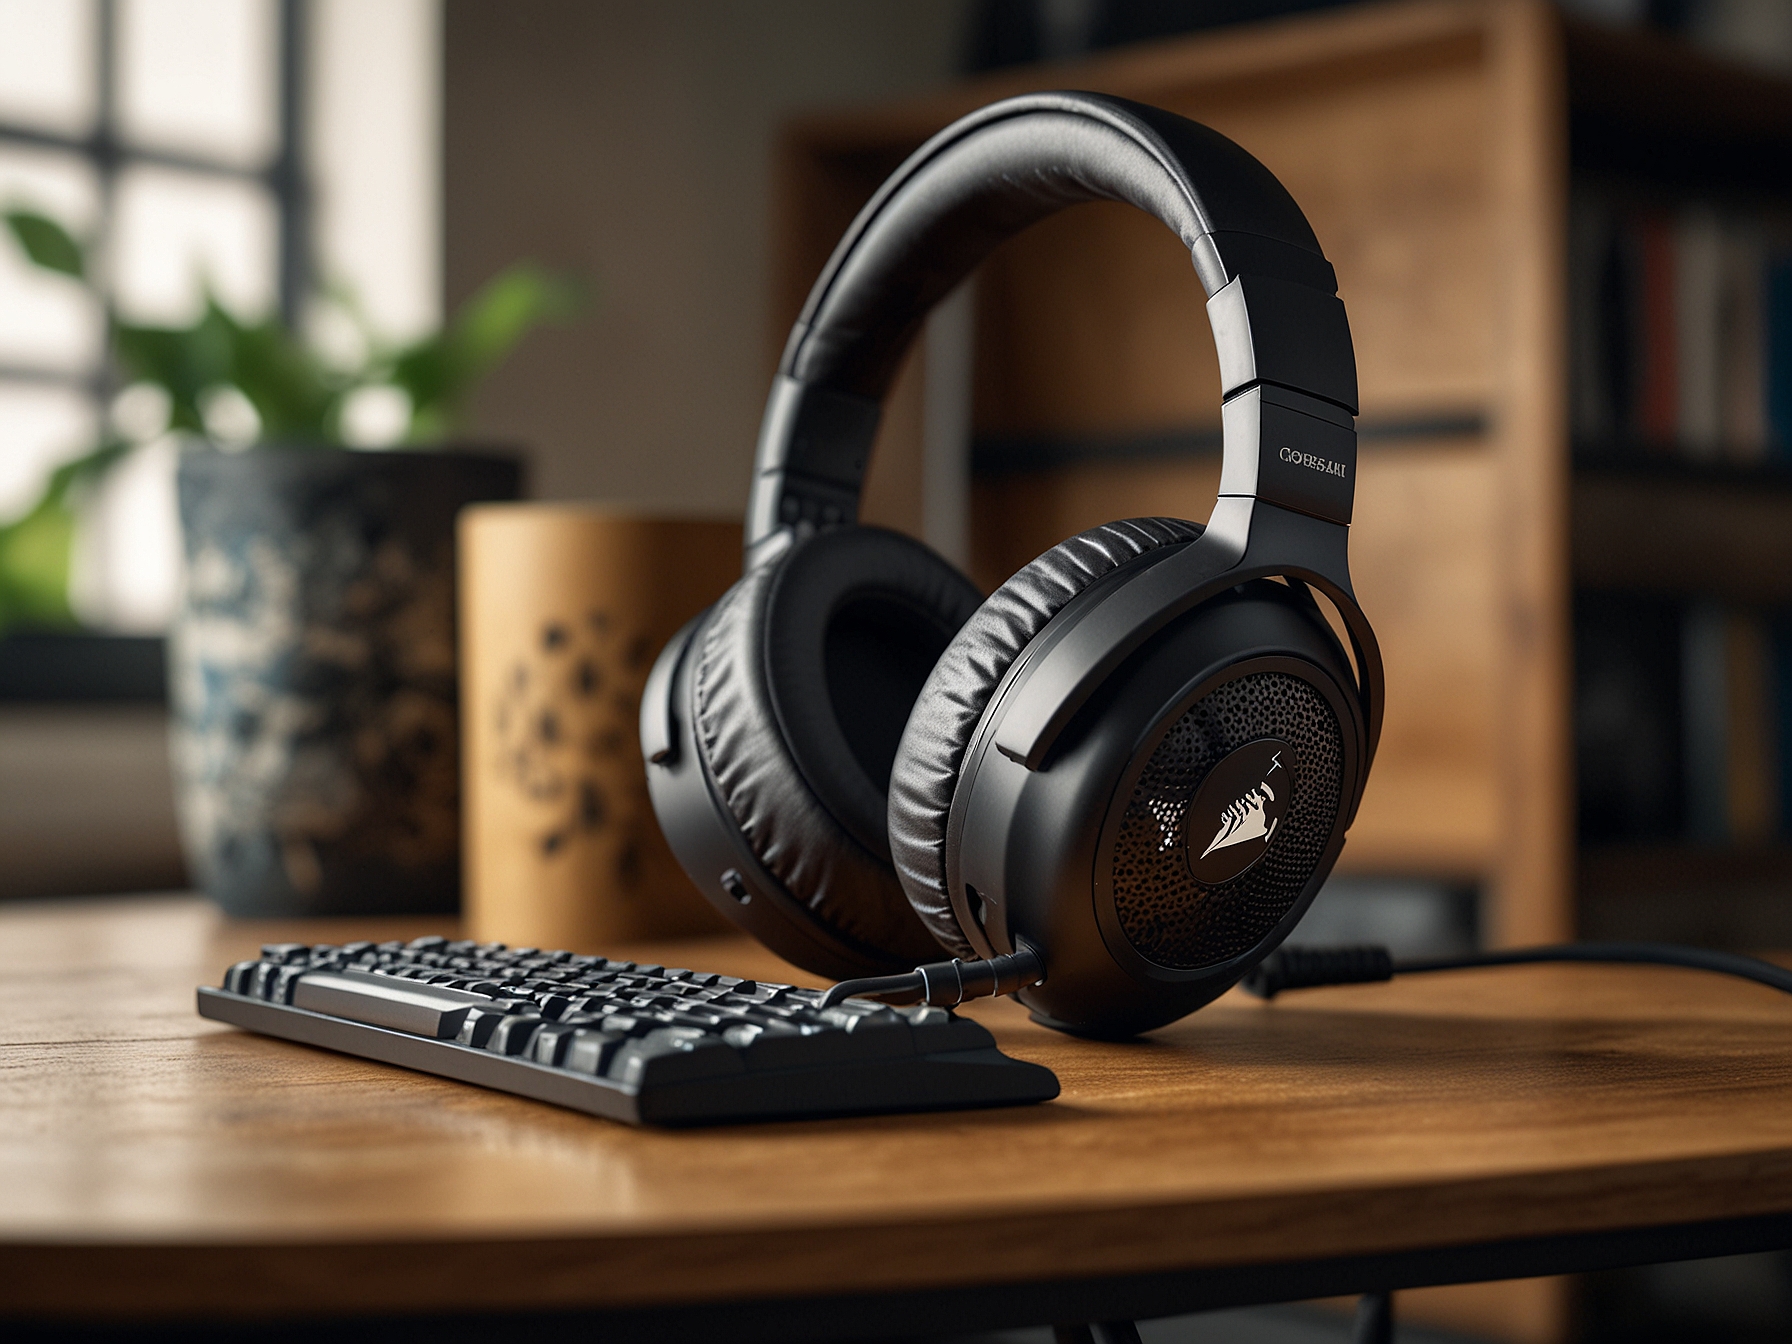 The Corsair HS35 V2 in action, connected to a gaming console, highlighting its compatibility with multiple platforms and the easy-to-access inline controls for quick sound adjustments.